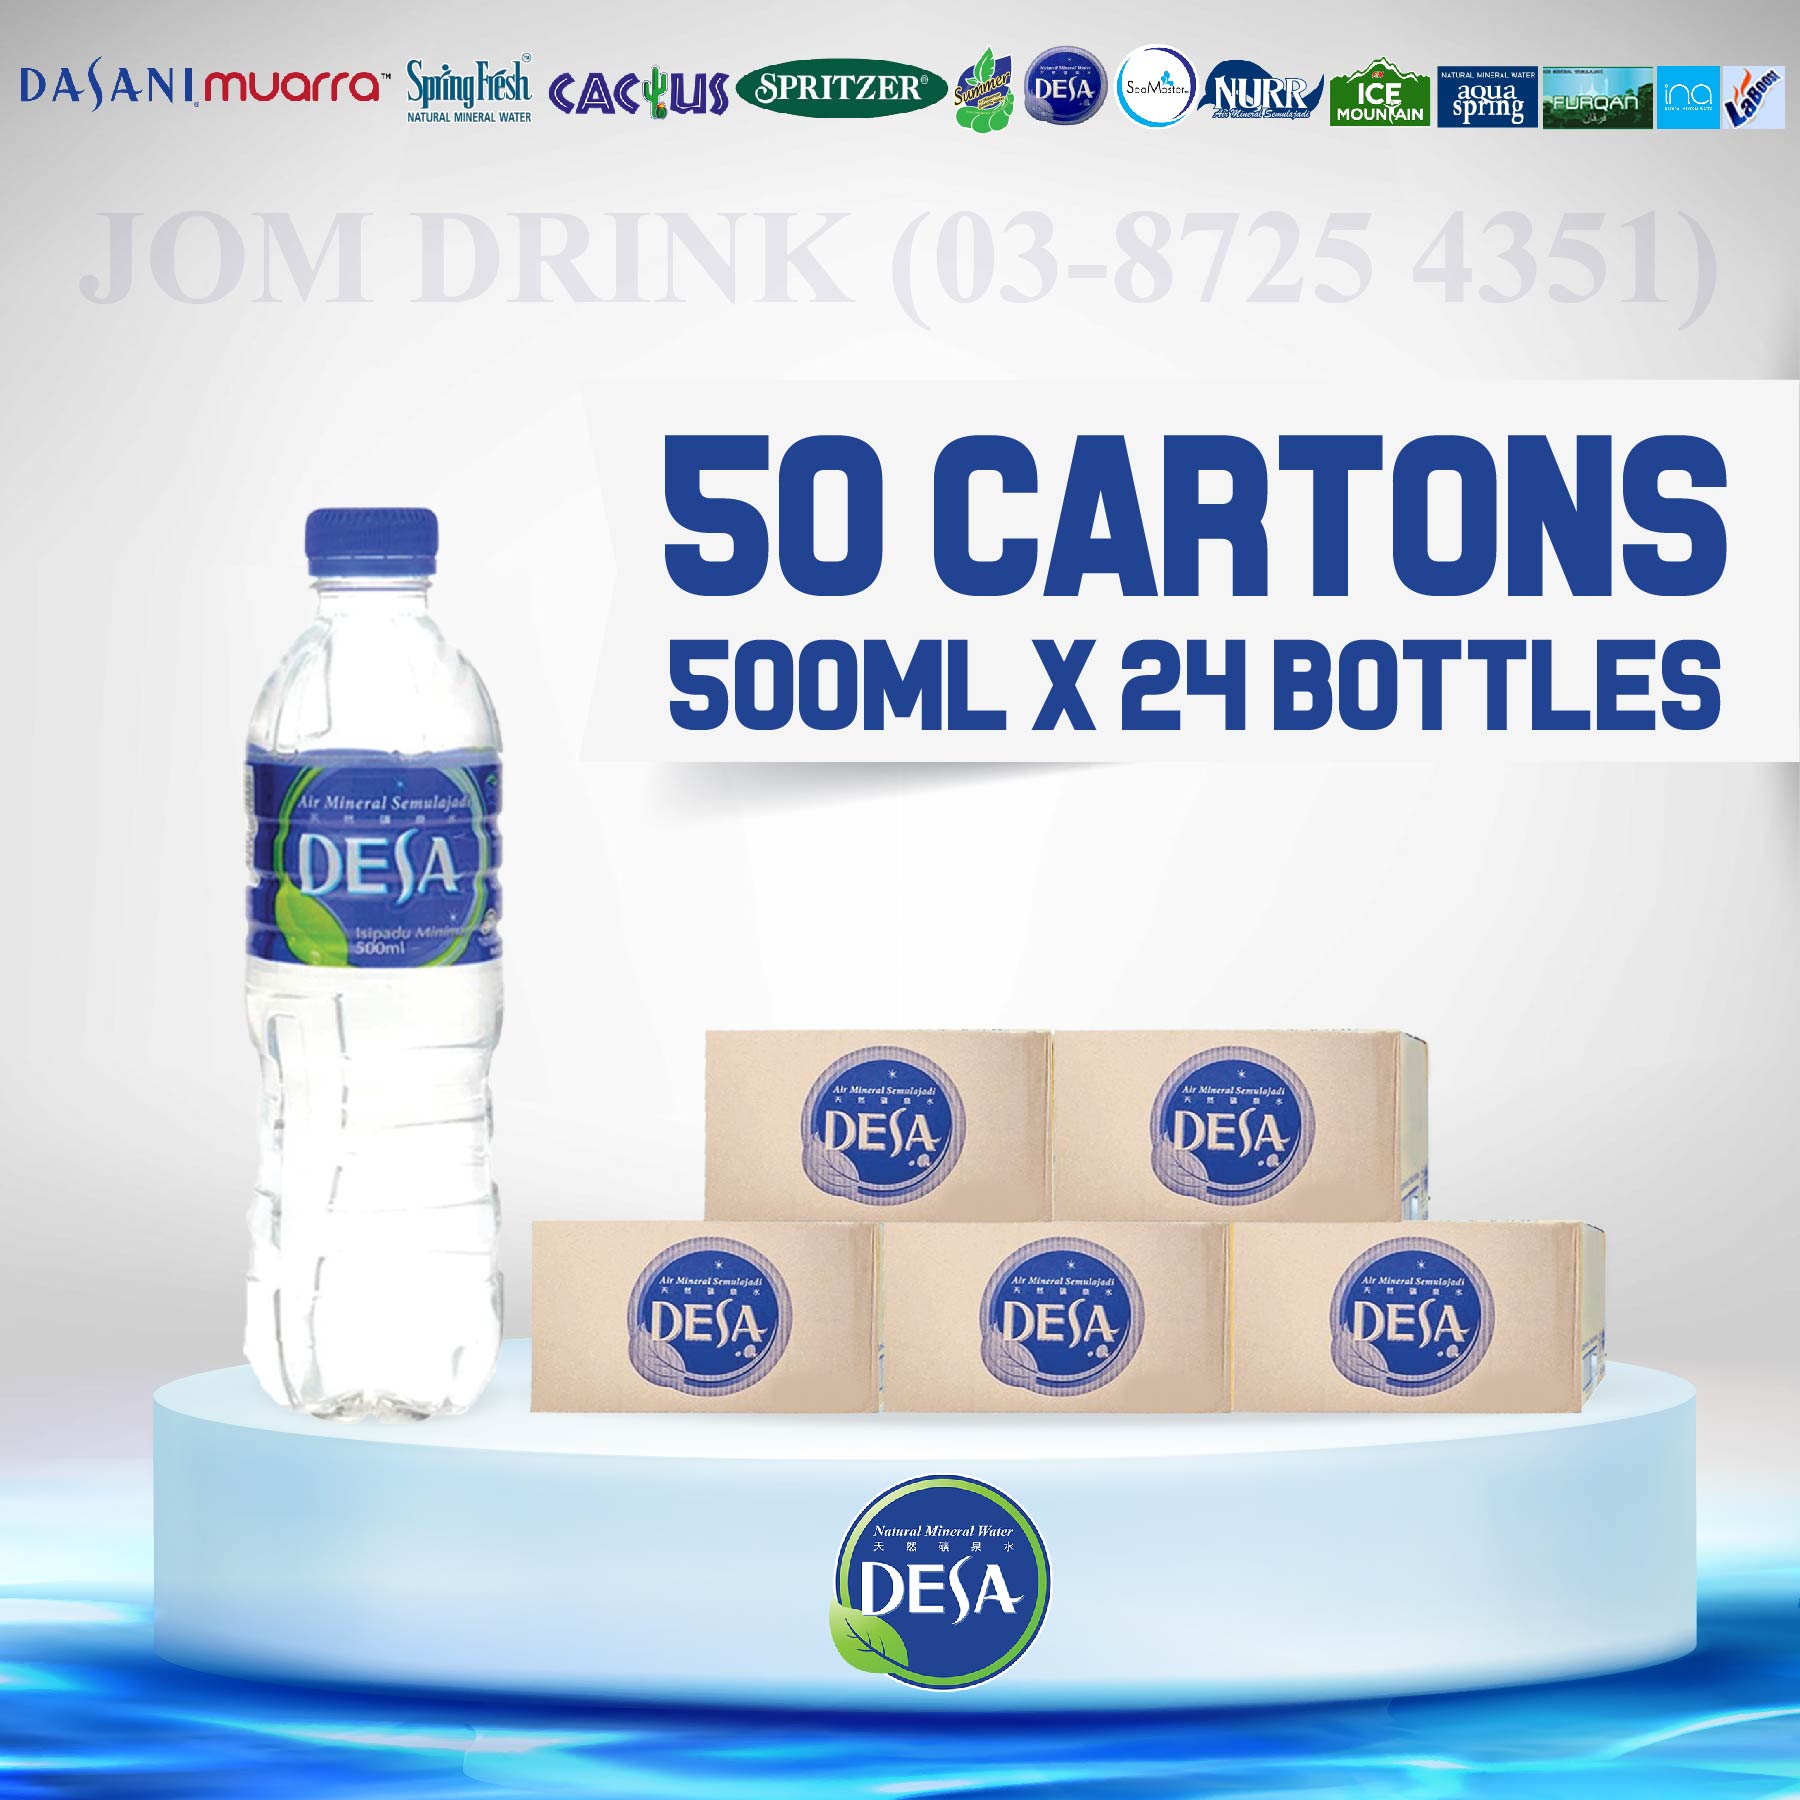 PACKAGES OF 50 BOXES : DESA MINERAL WATER 500ML